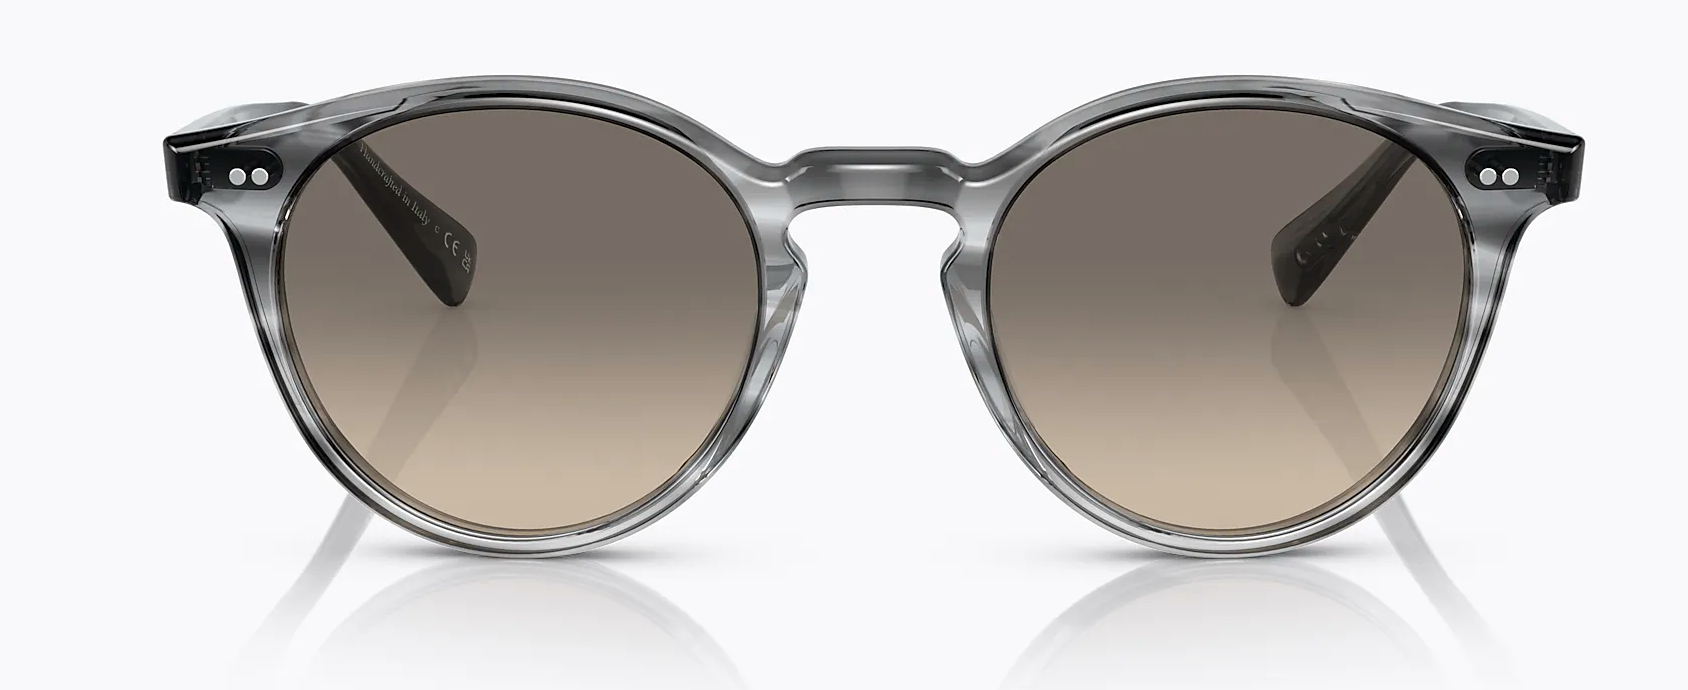 Oliver Peoples Romare